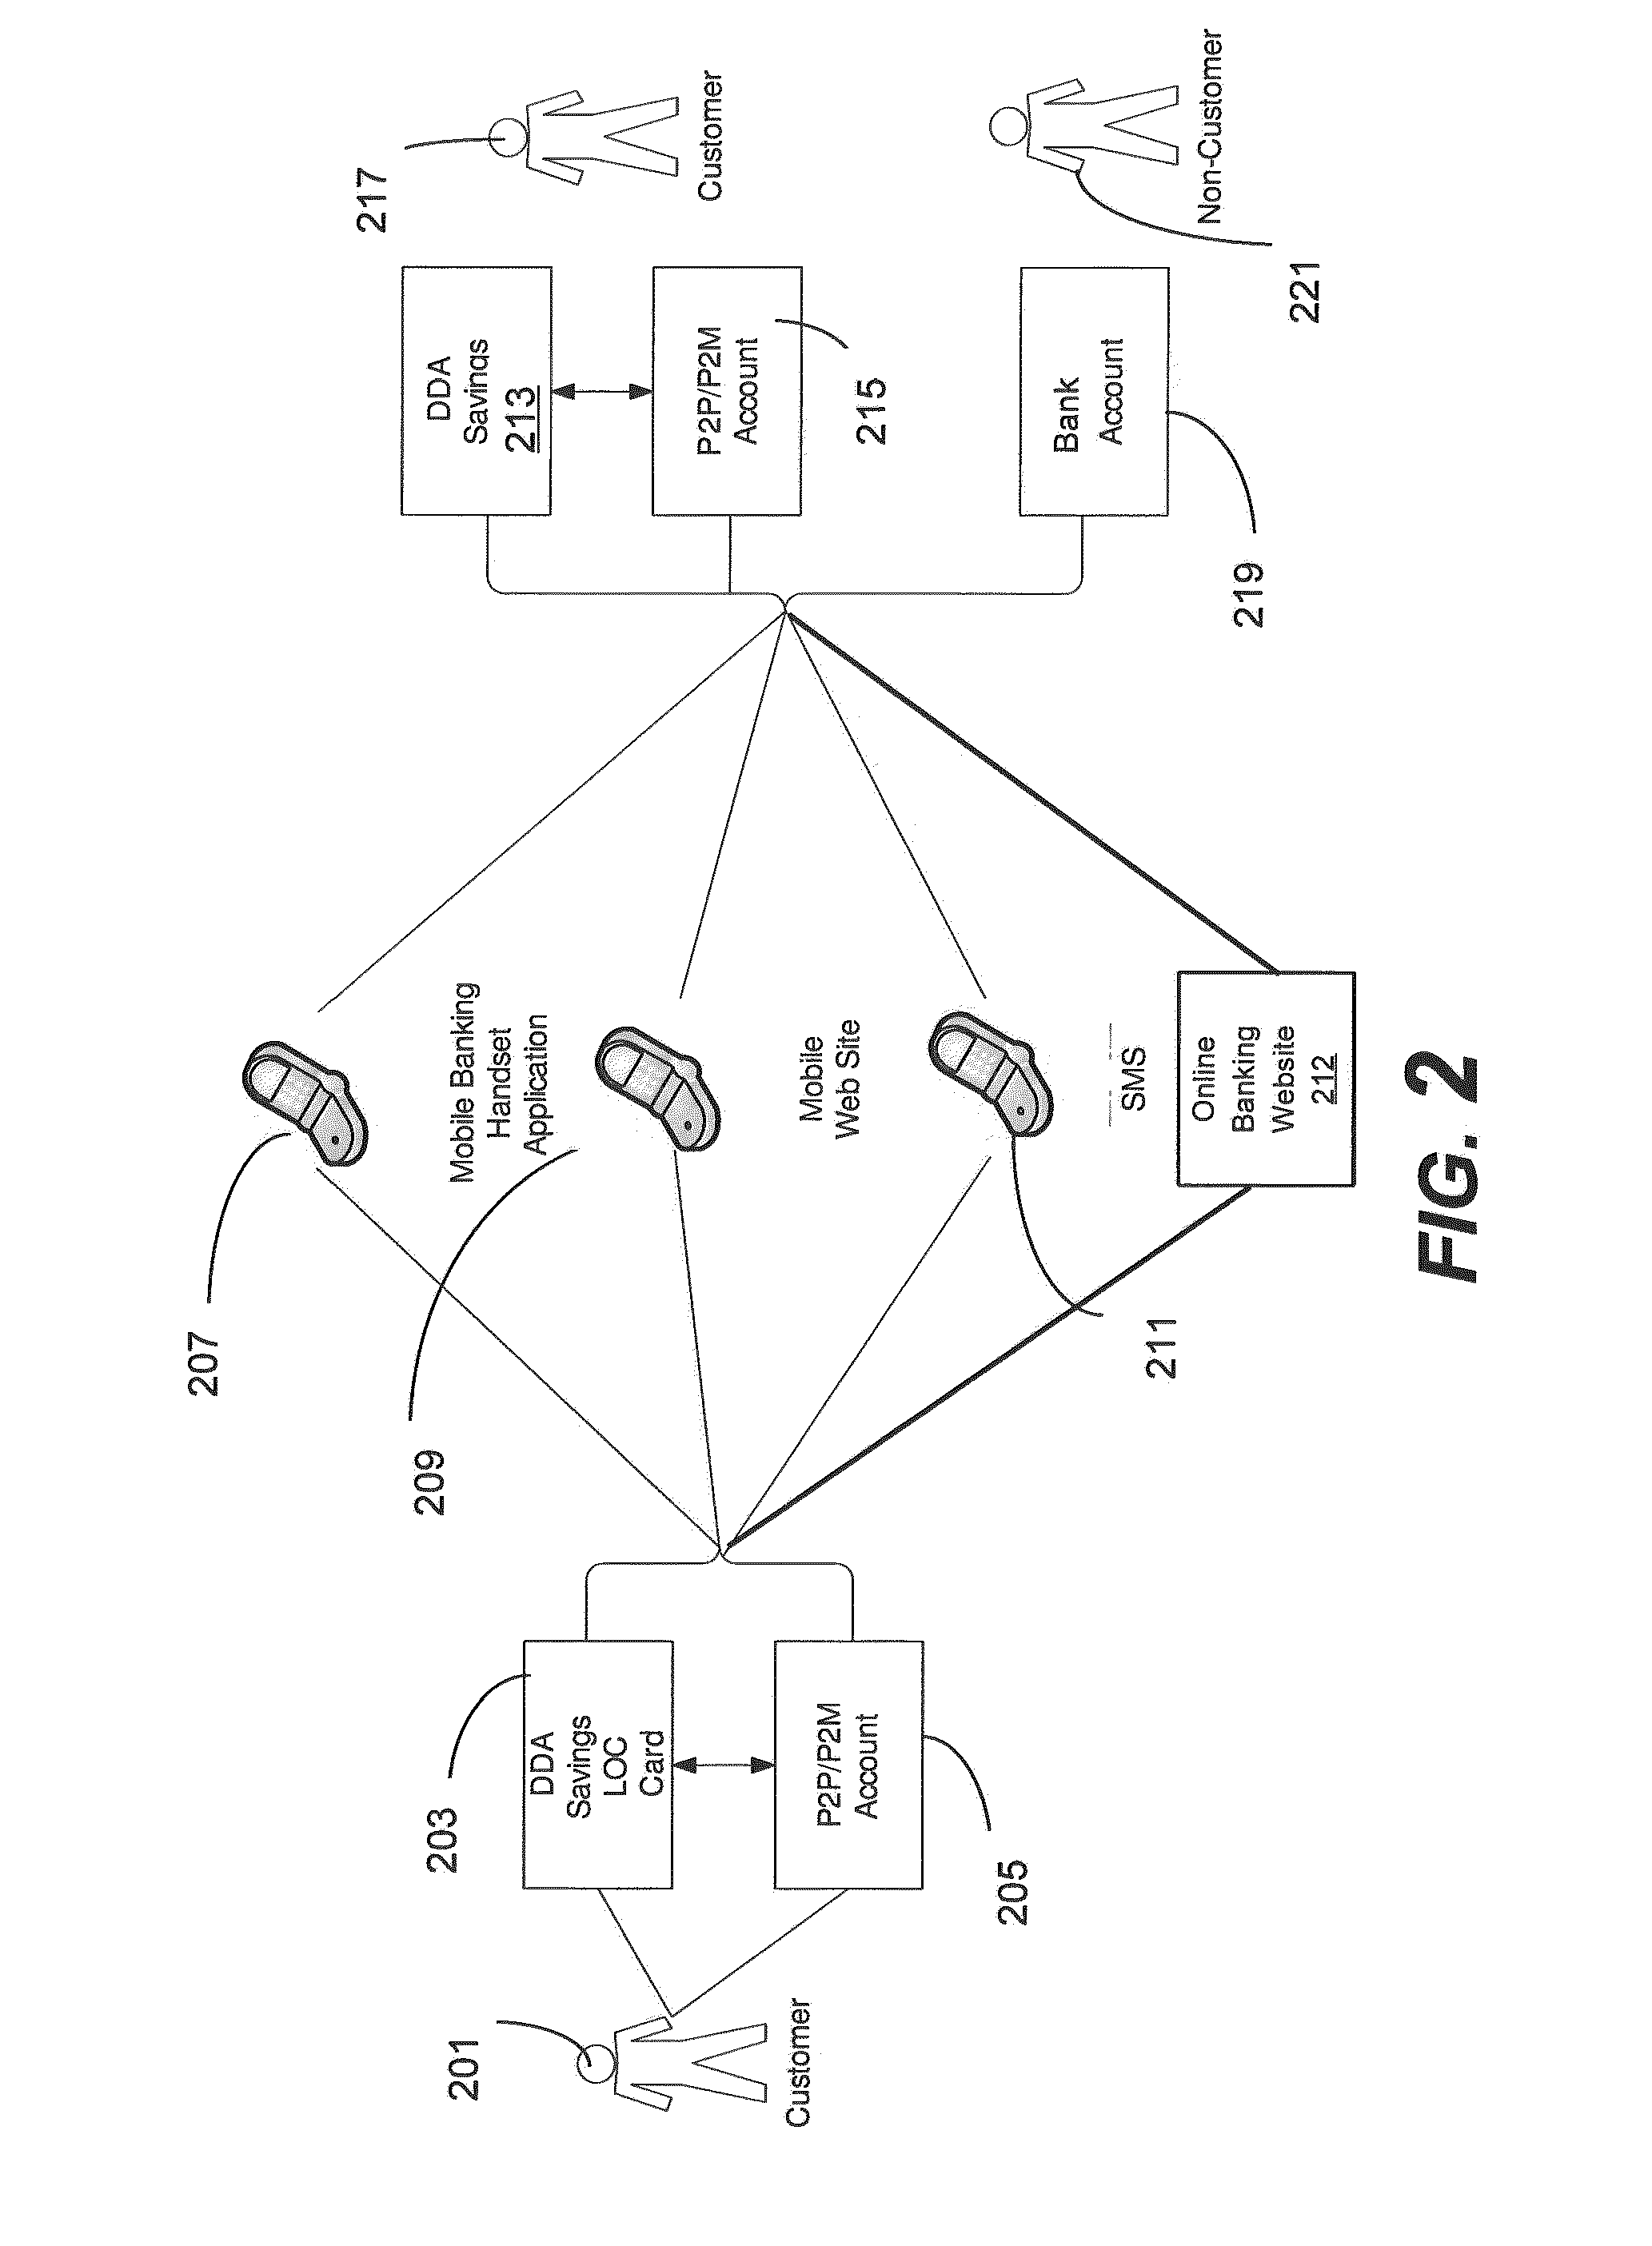 Electronic documents for person to person payment